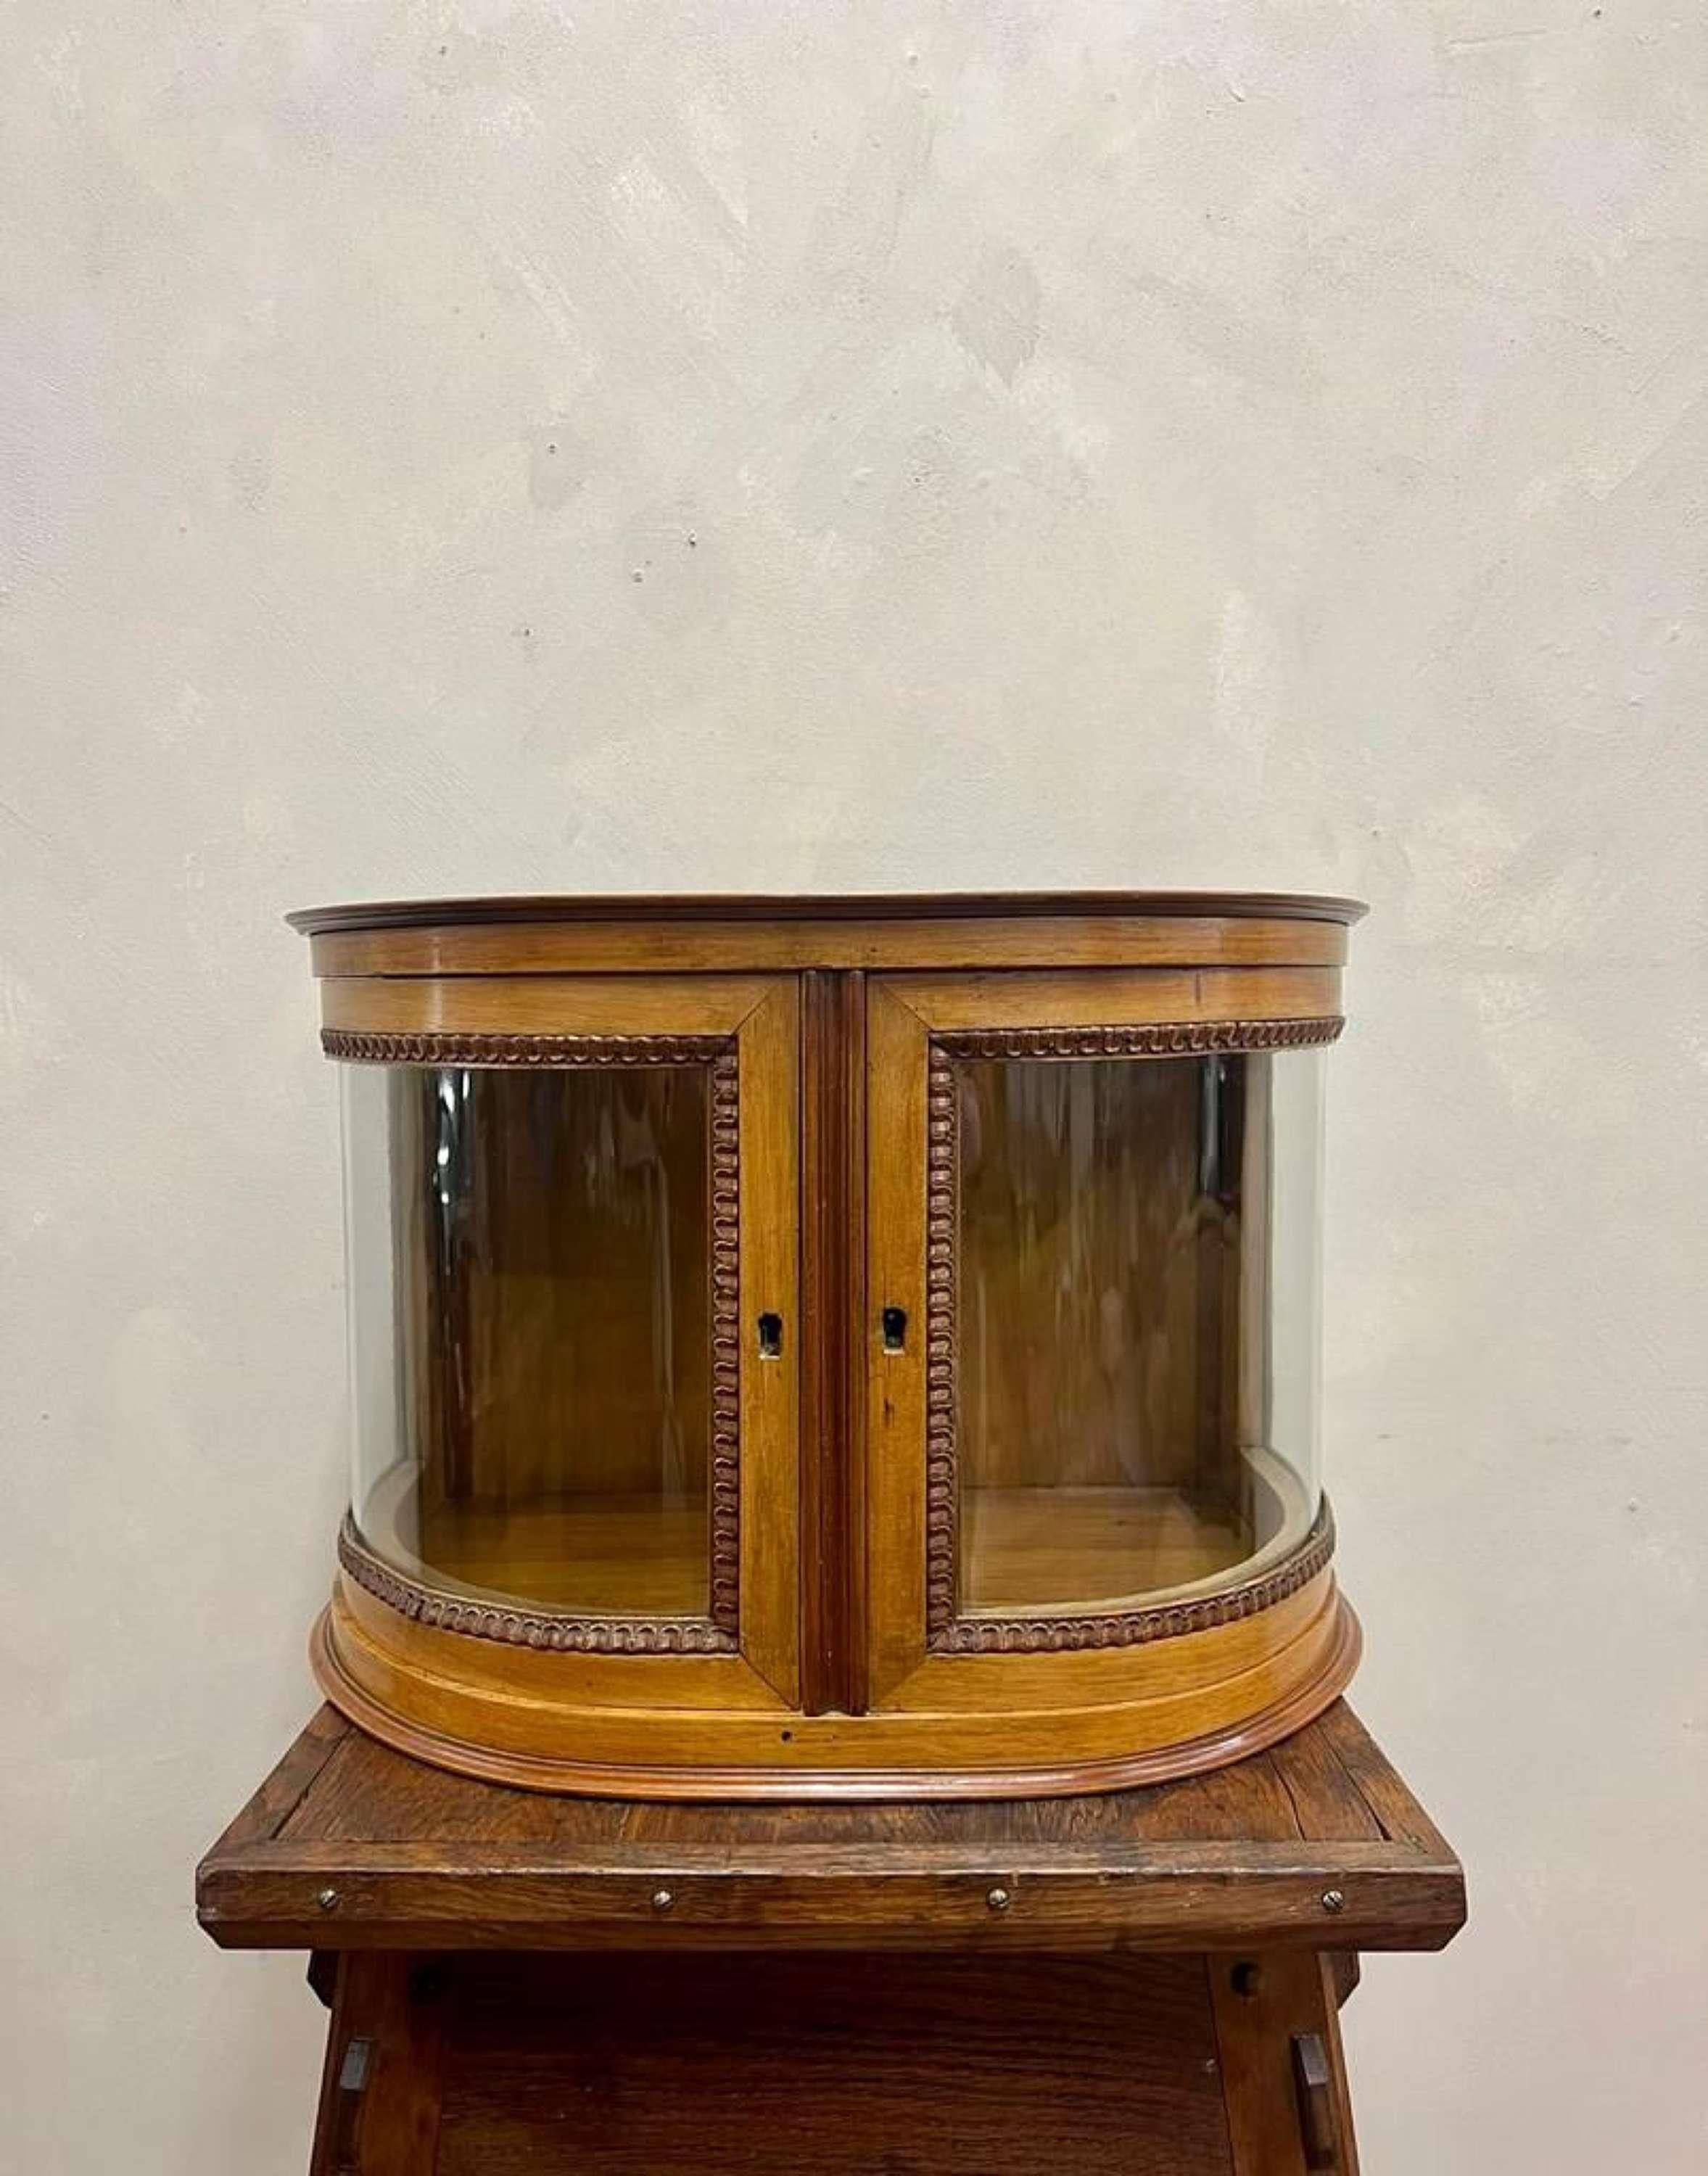 Late 19thc, curved glass, display showcase.
At one point part of a bigger, retail unit.
With carved door mouldings.
Good, clean order.
Potential to wall mount or sit atop a table.
Dimensions:W: 53.7cm (21.1